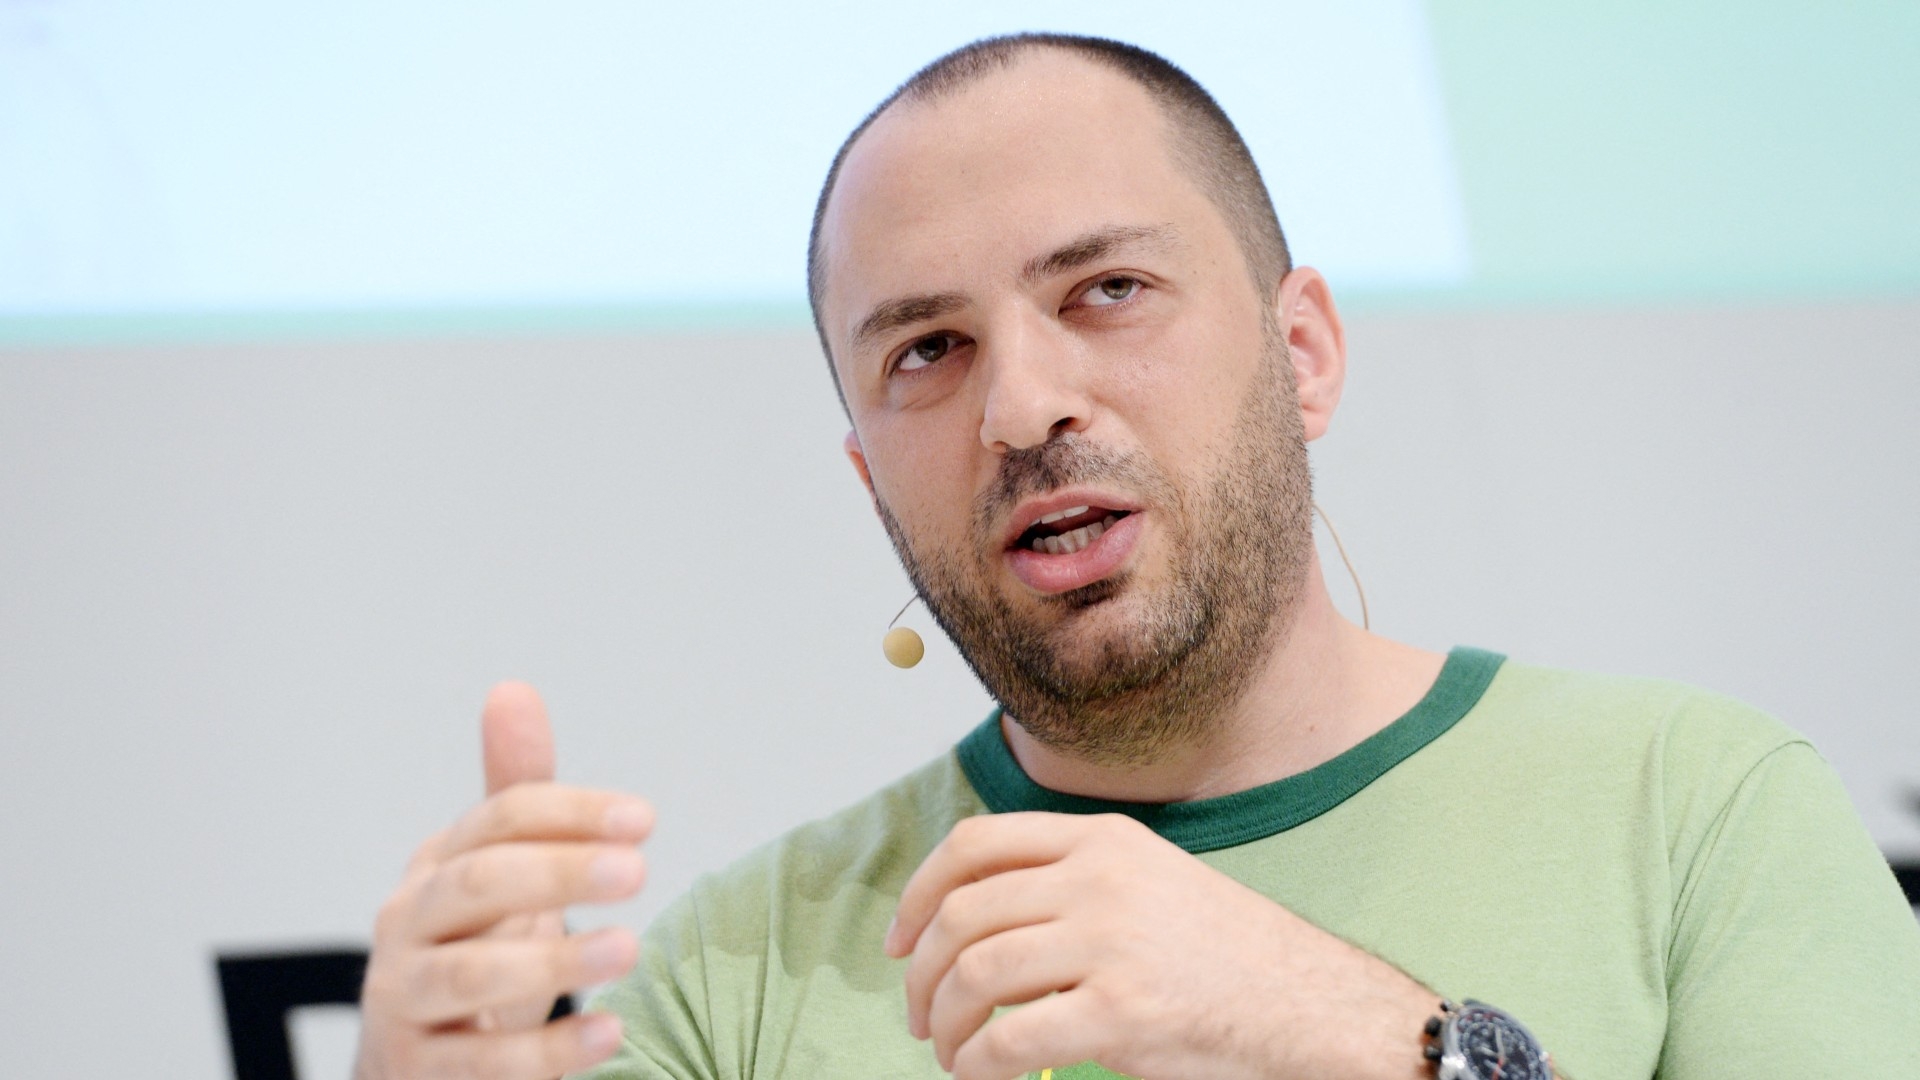 WhatsApp inventor and co-founder Jan Koum has a net worth of between $9.8bn and $13.7bn.